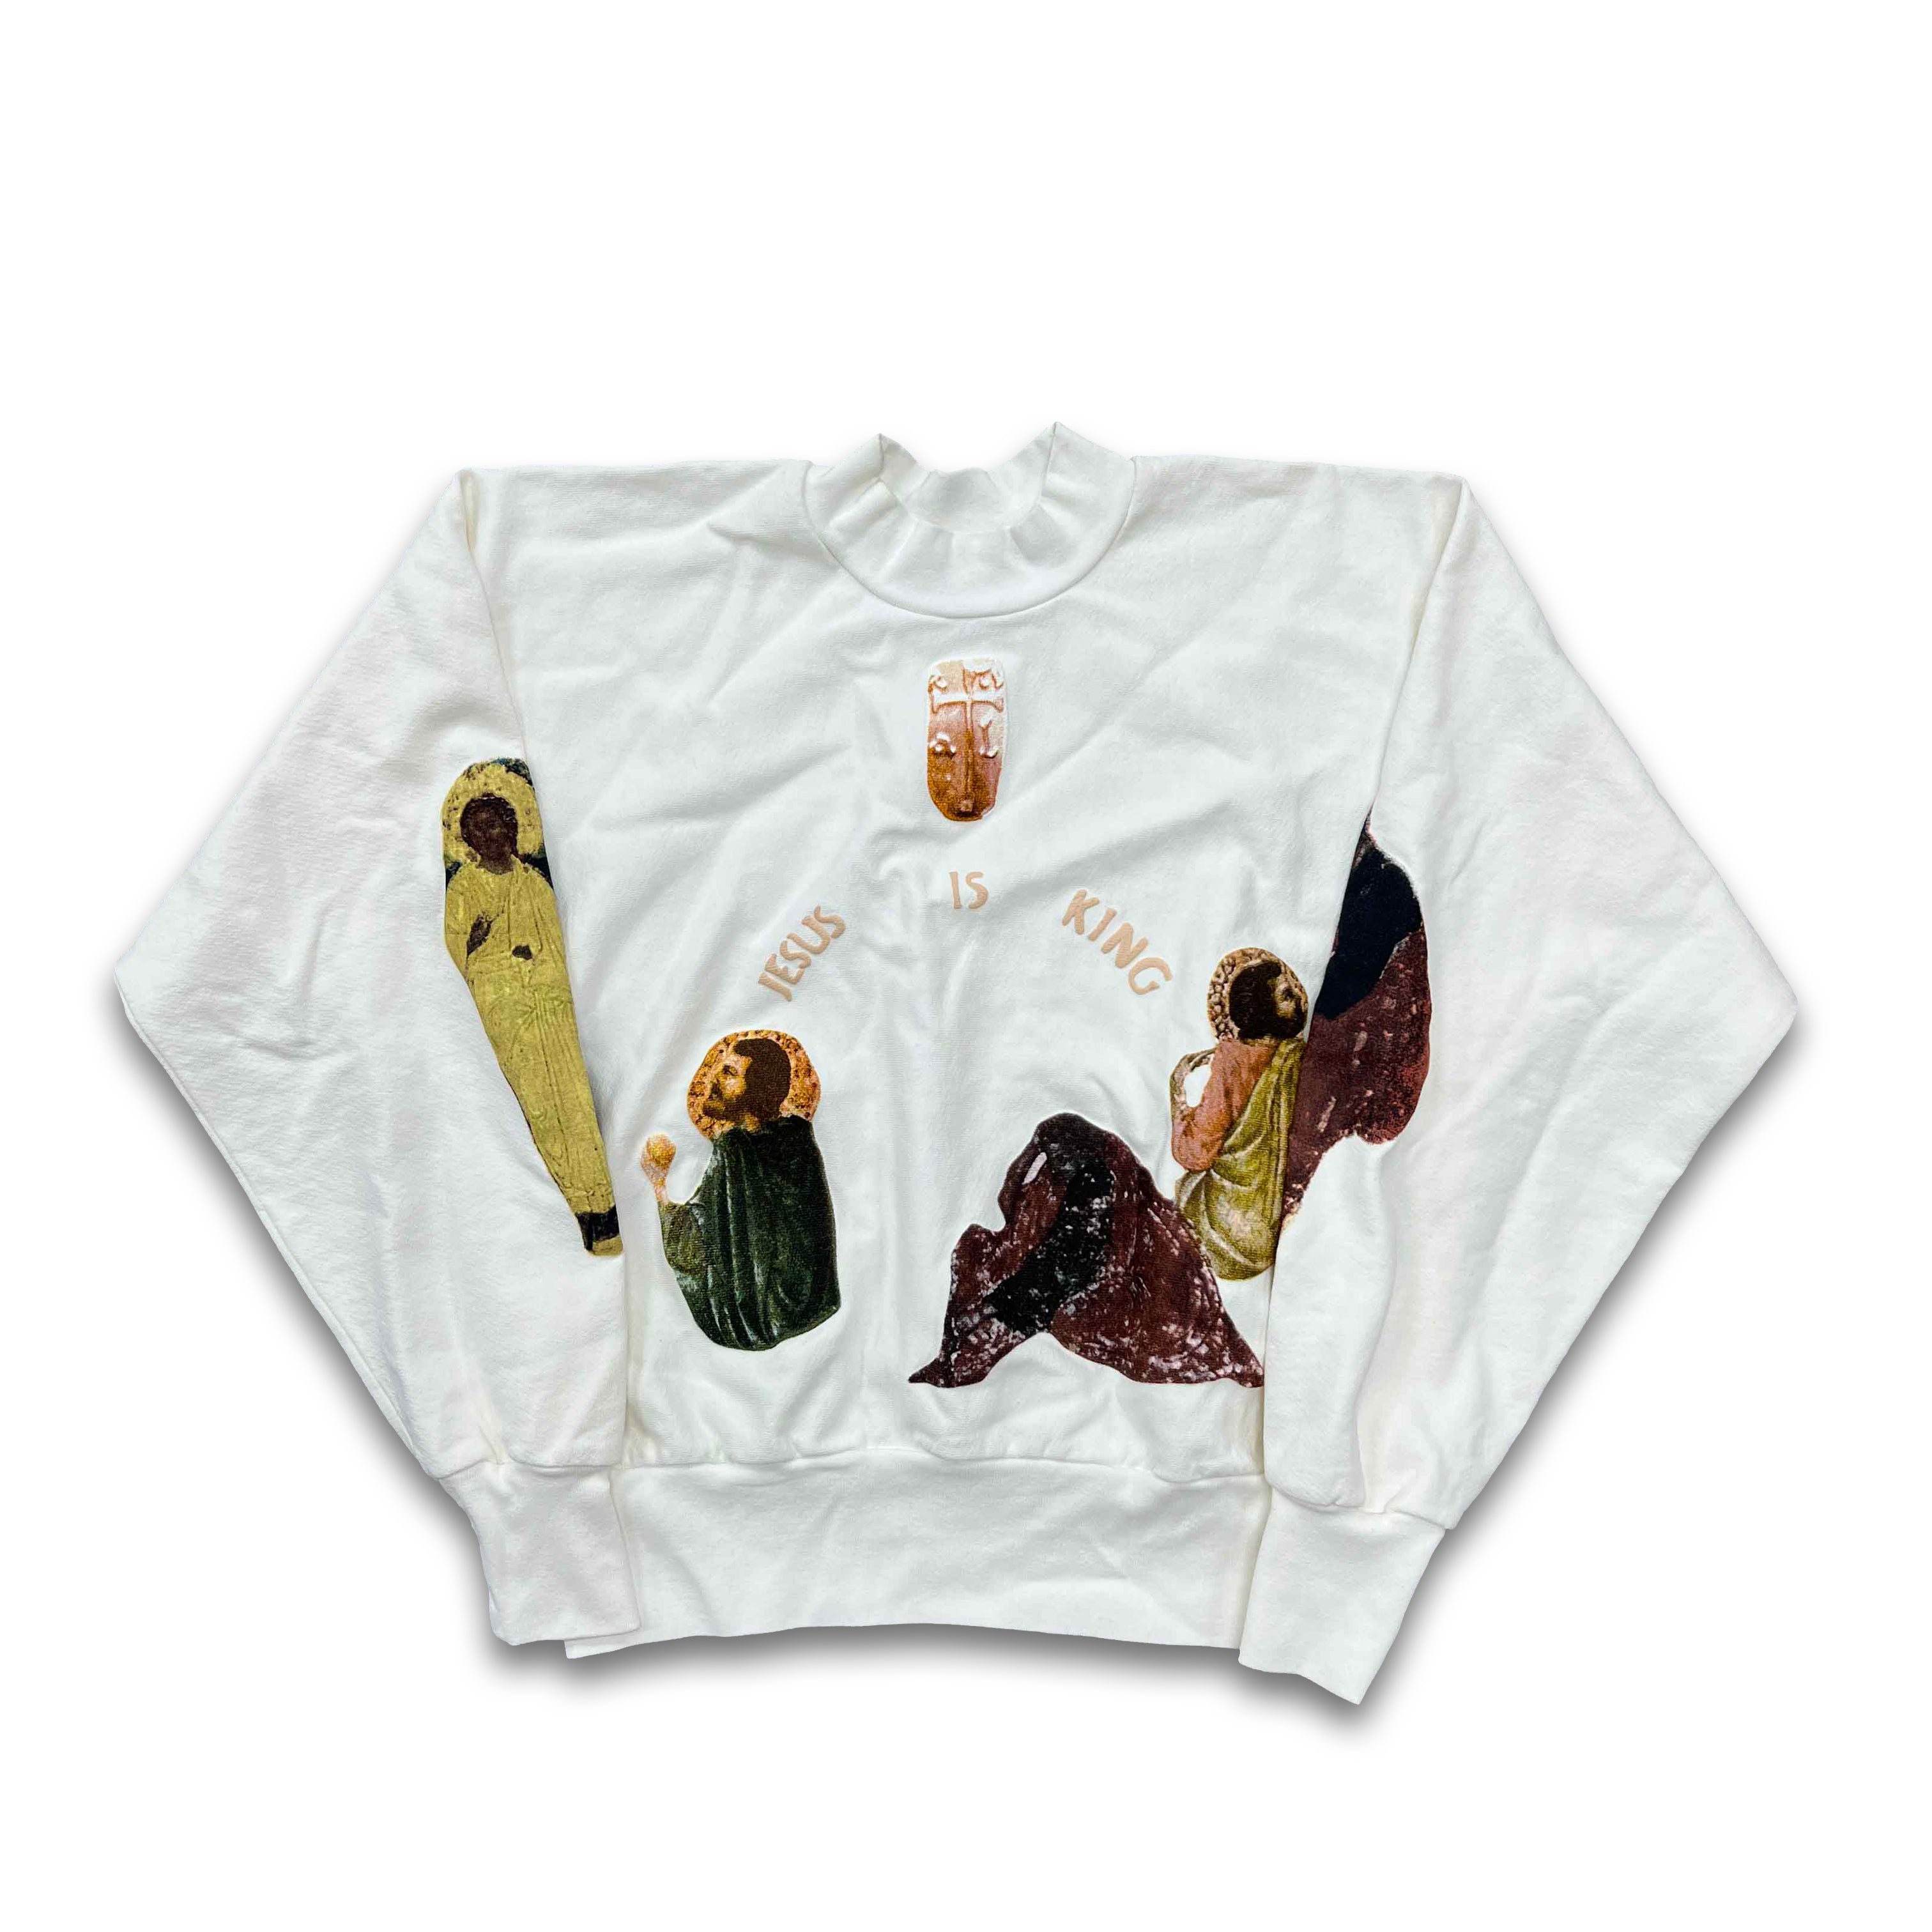 CPFM Crewneck Sweater &quot;JESUS IS KING CROSS&quot; White New (Cond) Size S